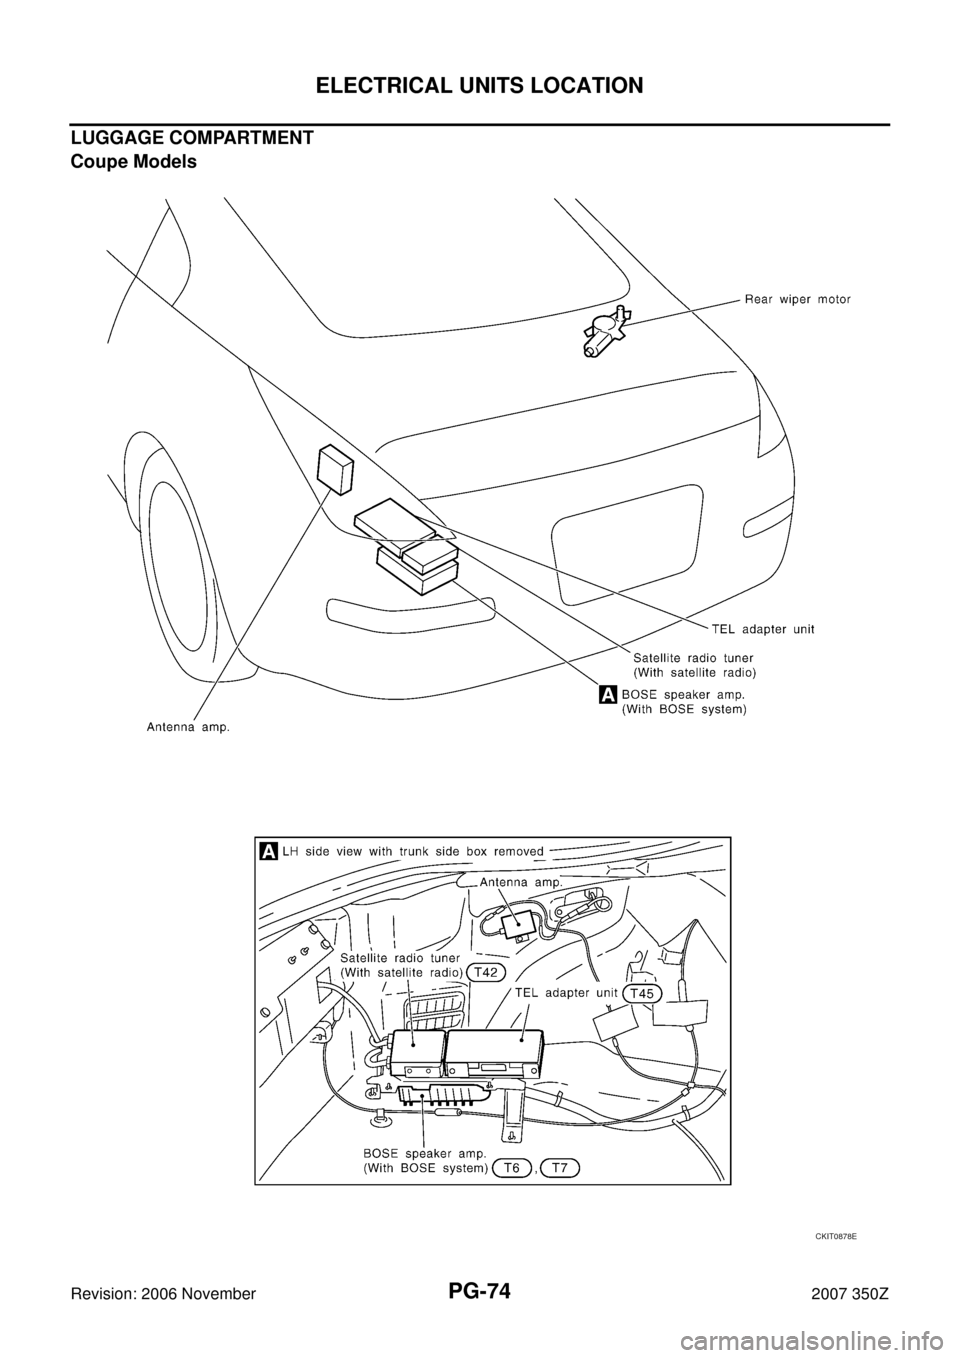 NISSAN 350Z 2007 Z33 Power Supply, Ground And Circuit Manual PDF PG-74
ELECTRICAL UNITS LOCATION
Revision: 2006 November2007 350Z
LUGGAGE COMPARTMENT
Coupe Models
CKIT0878E 